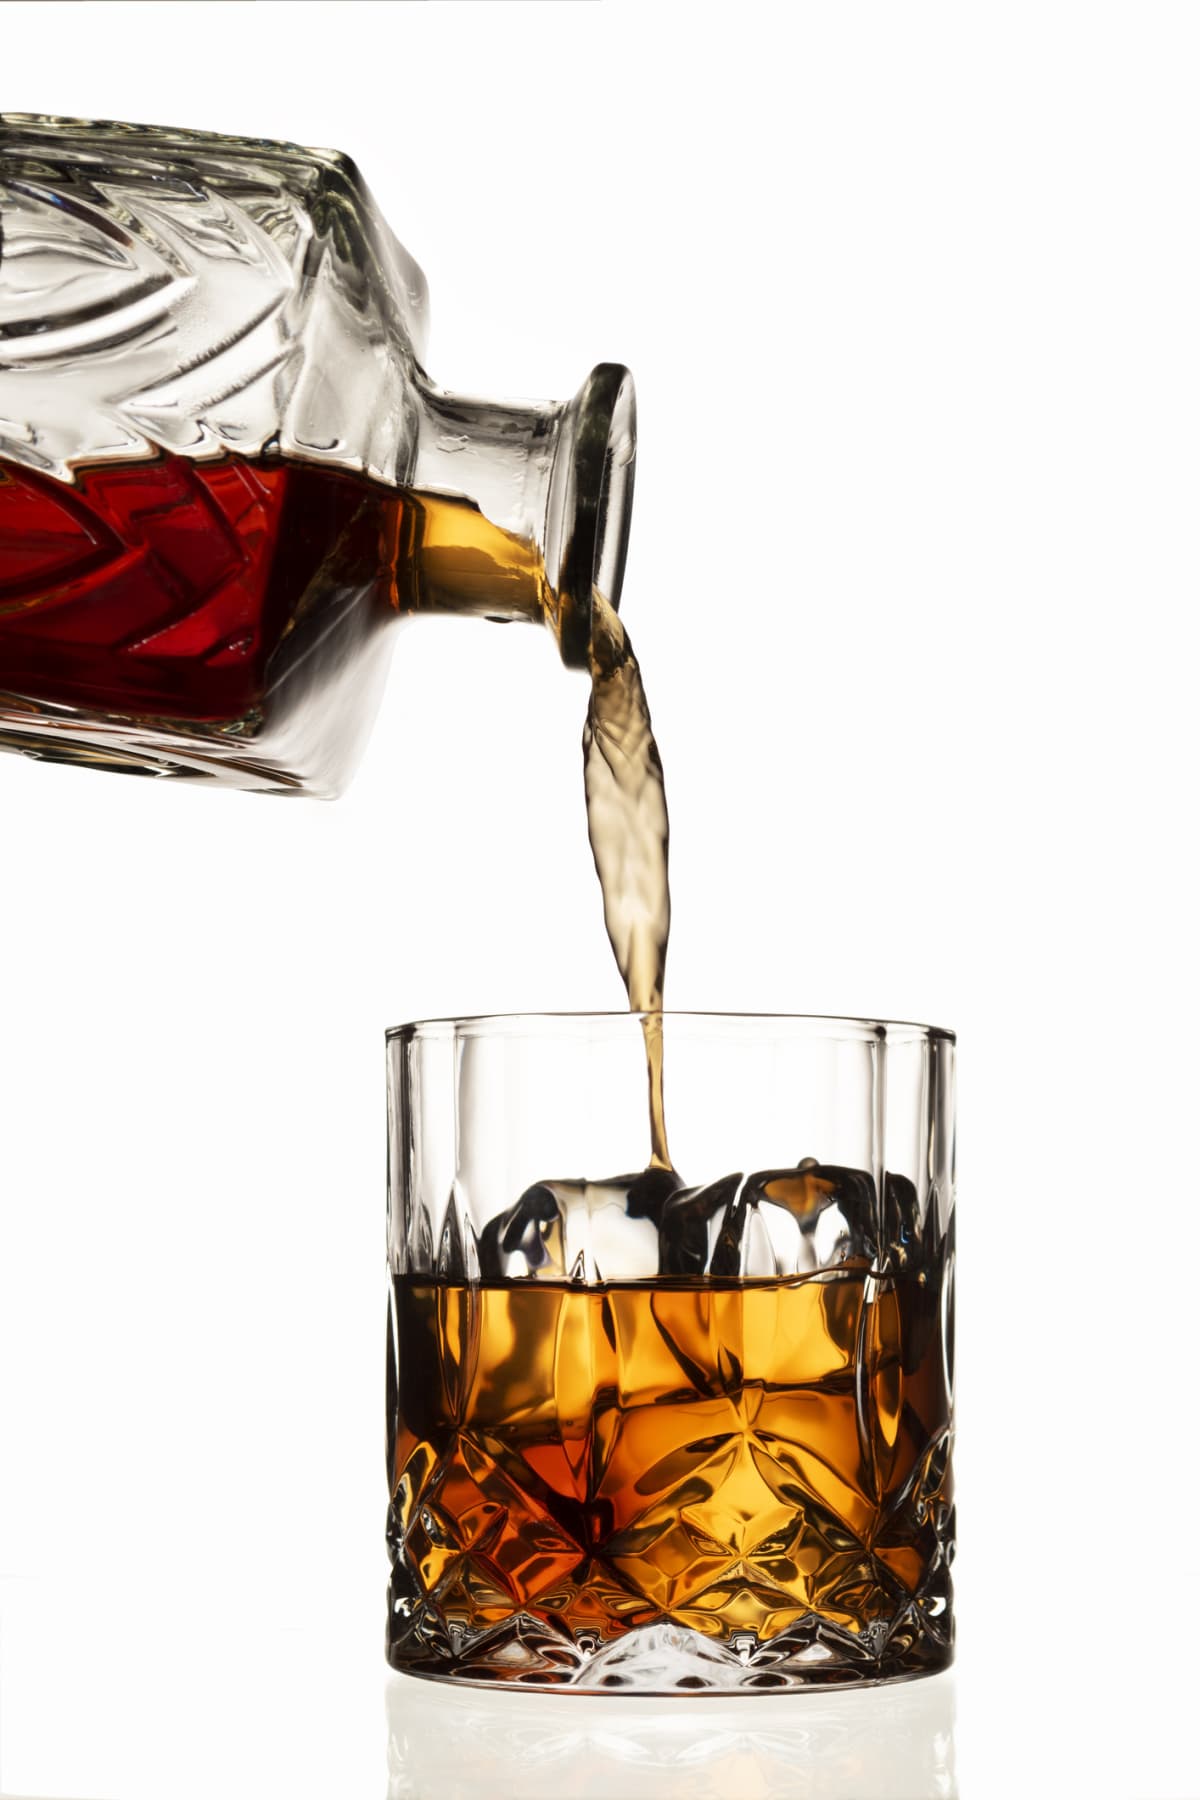 bourbon being poured into a rocks glass from a decanter